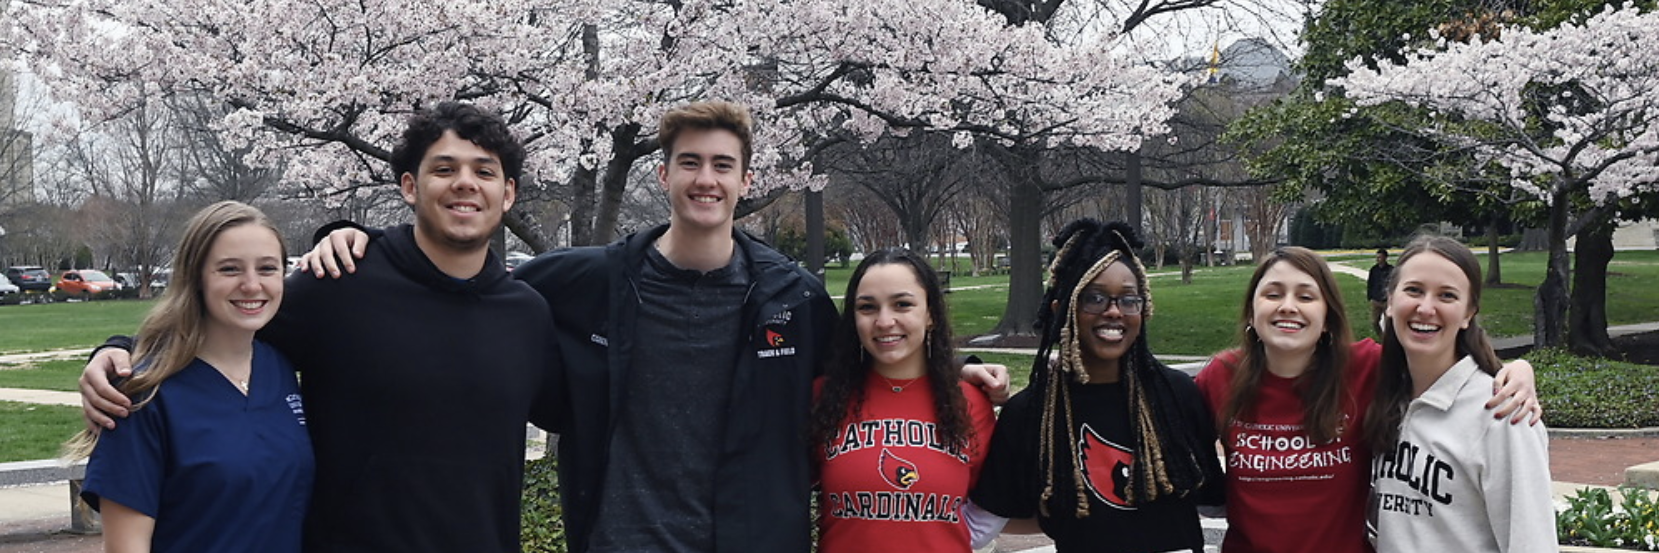 Students pose for a photo on campus